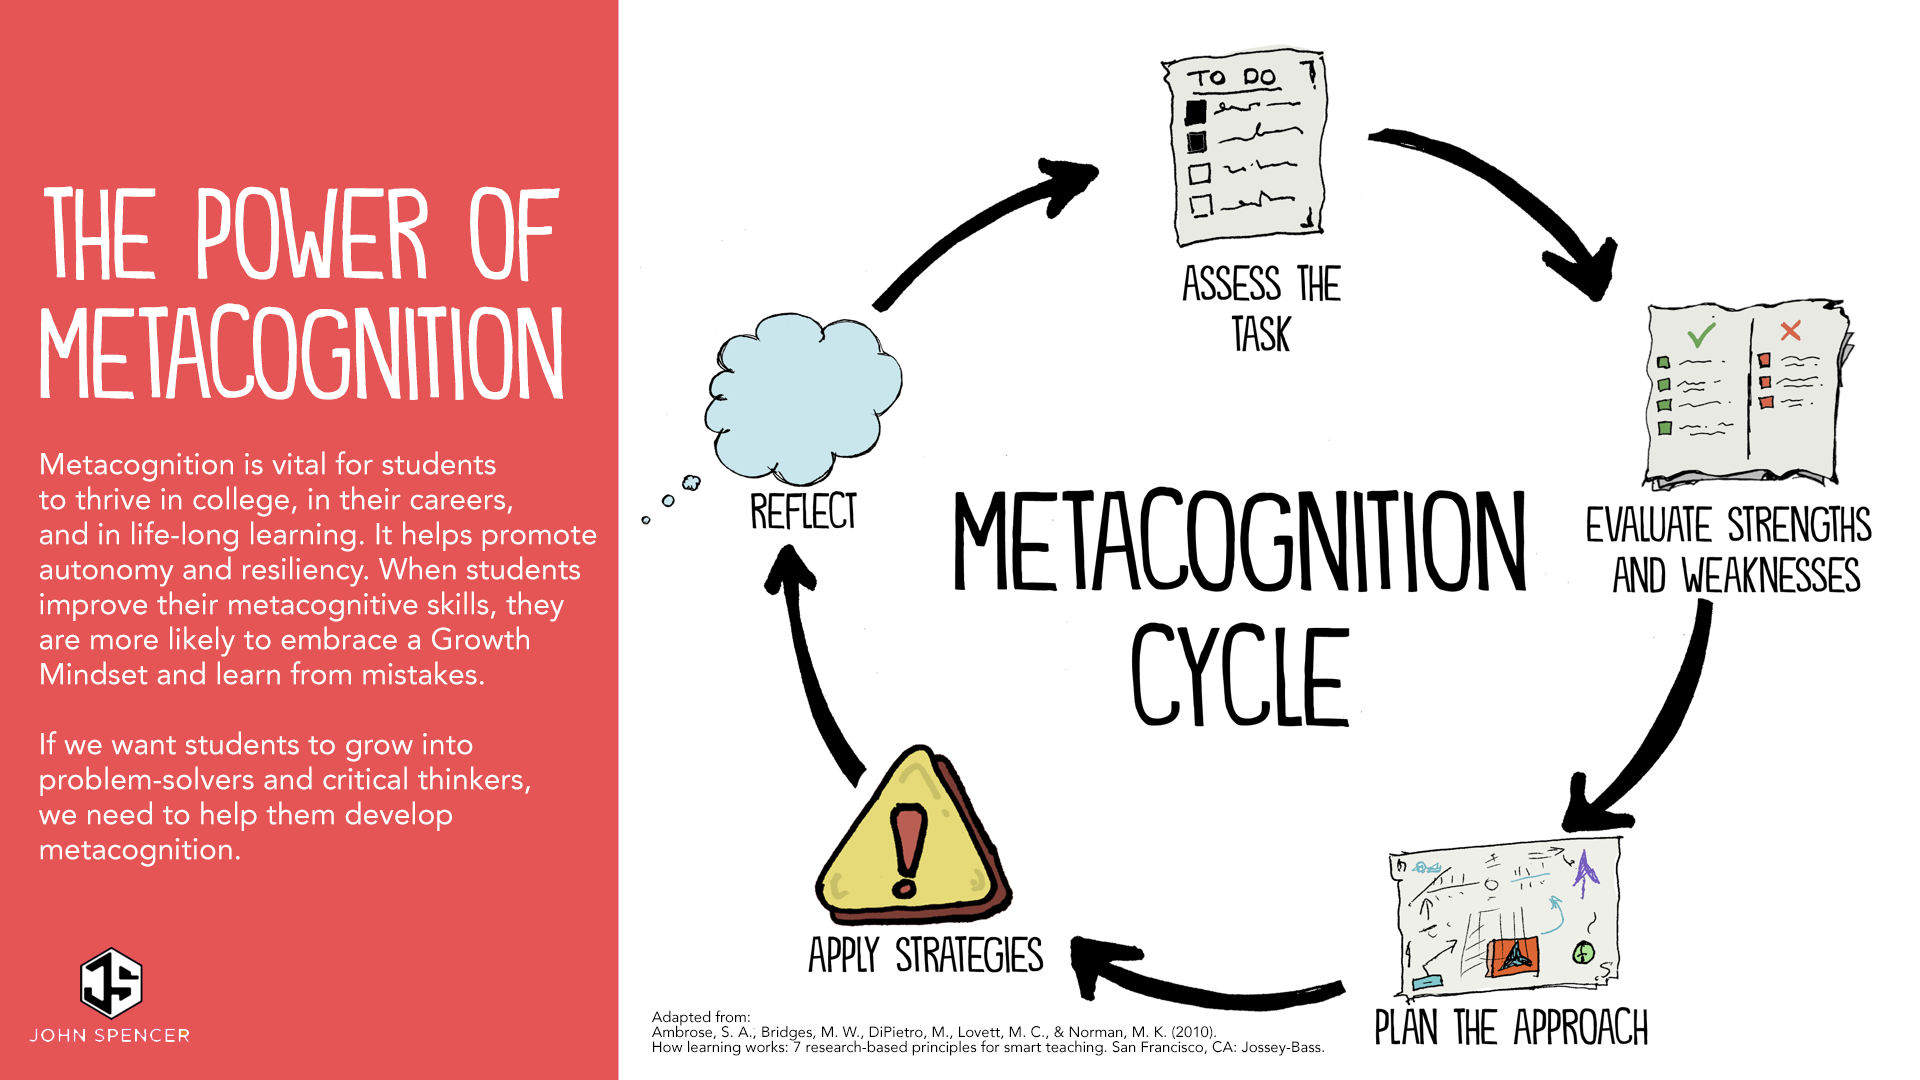 The Metacognition Cycle - via John Spencer